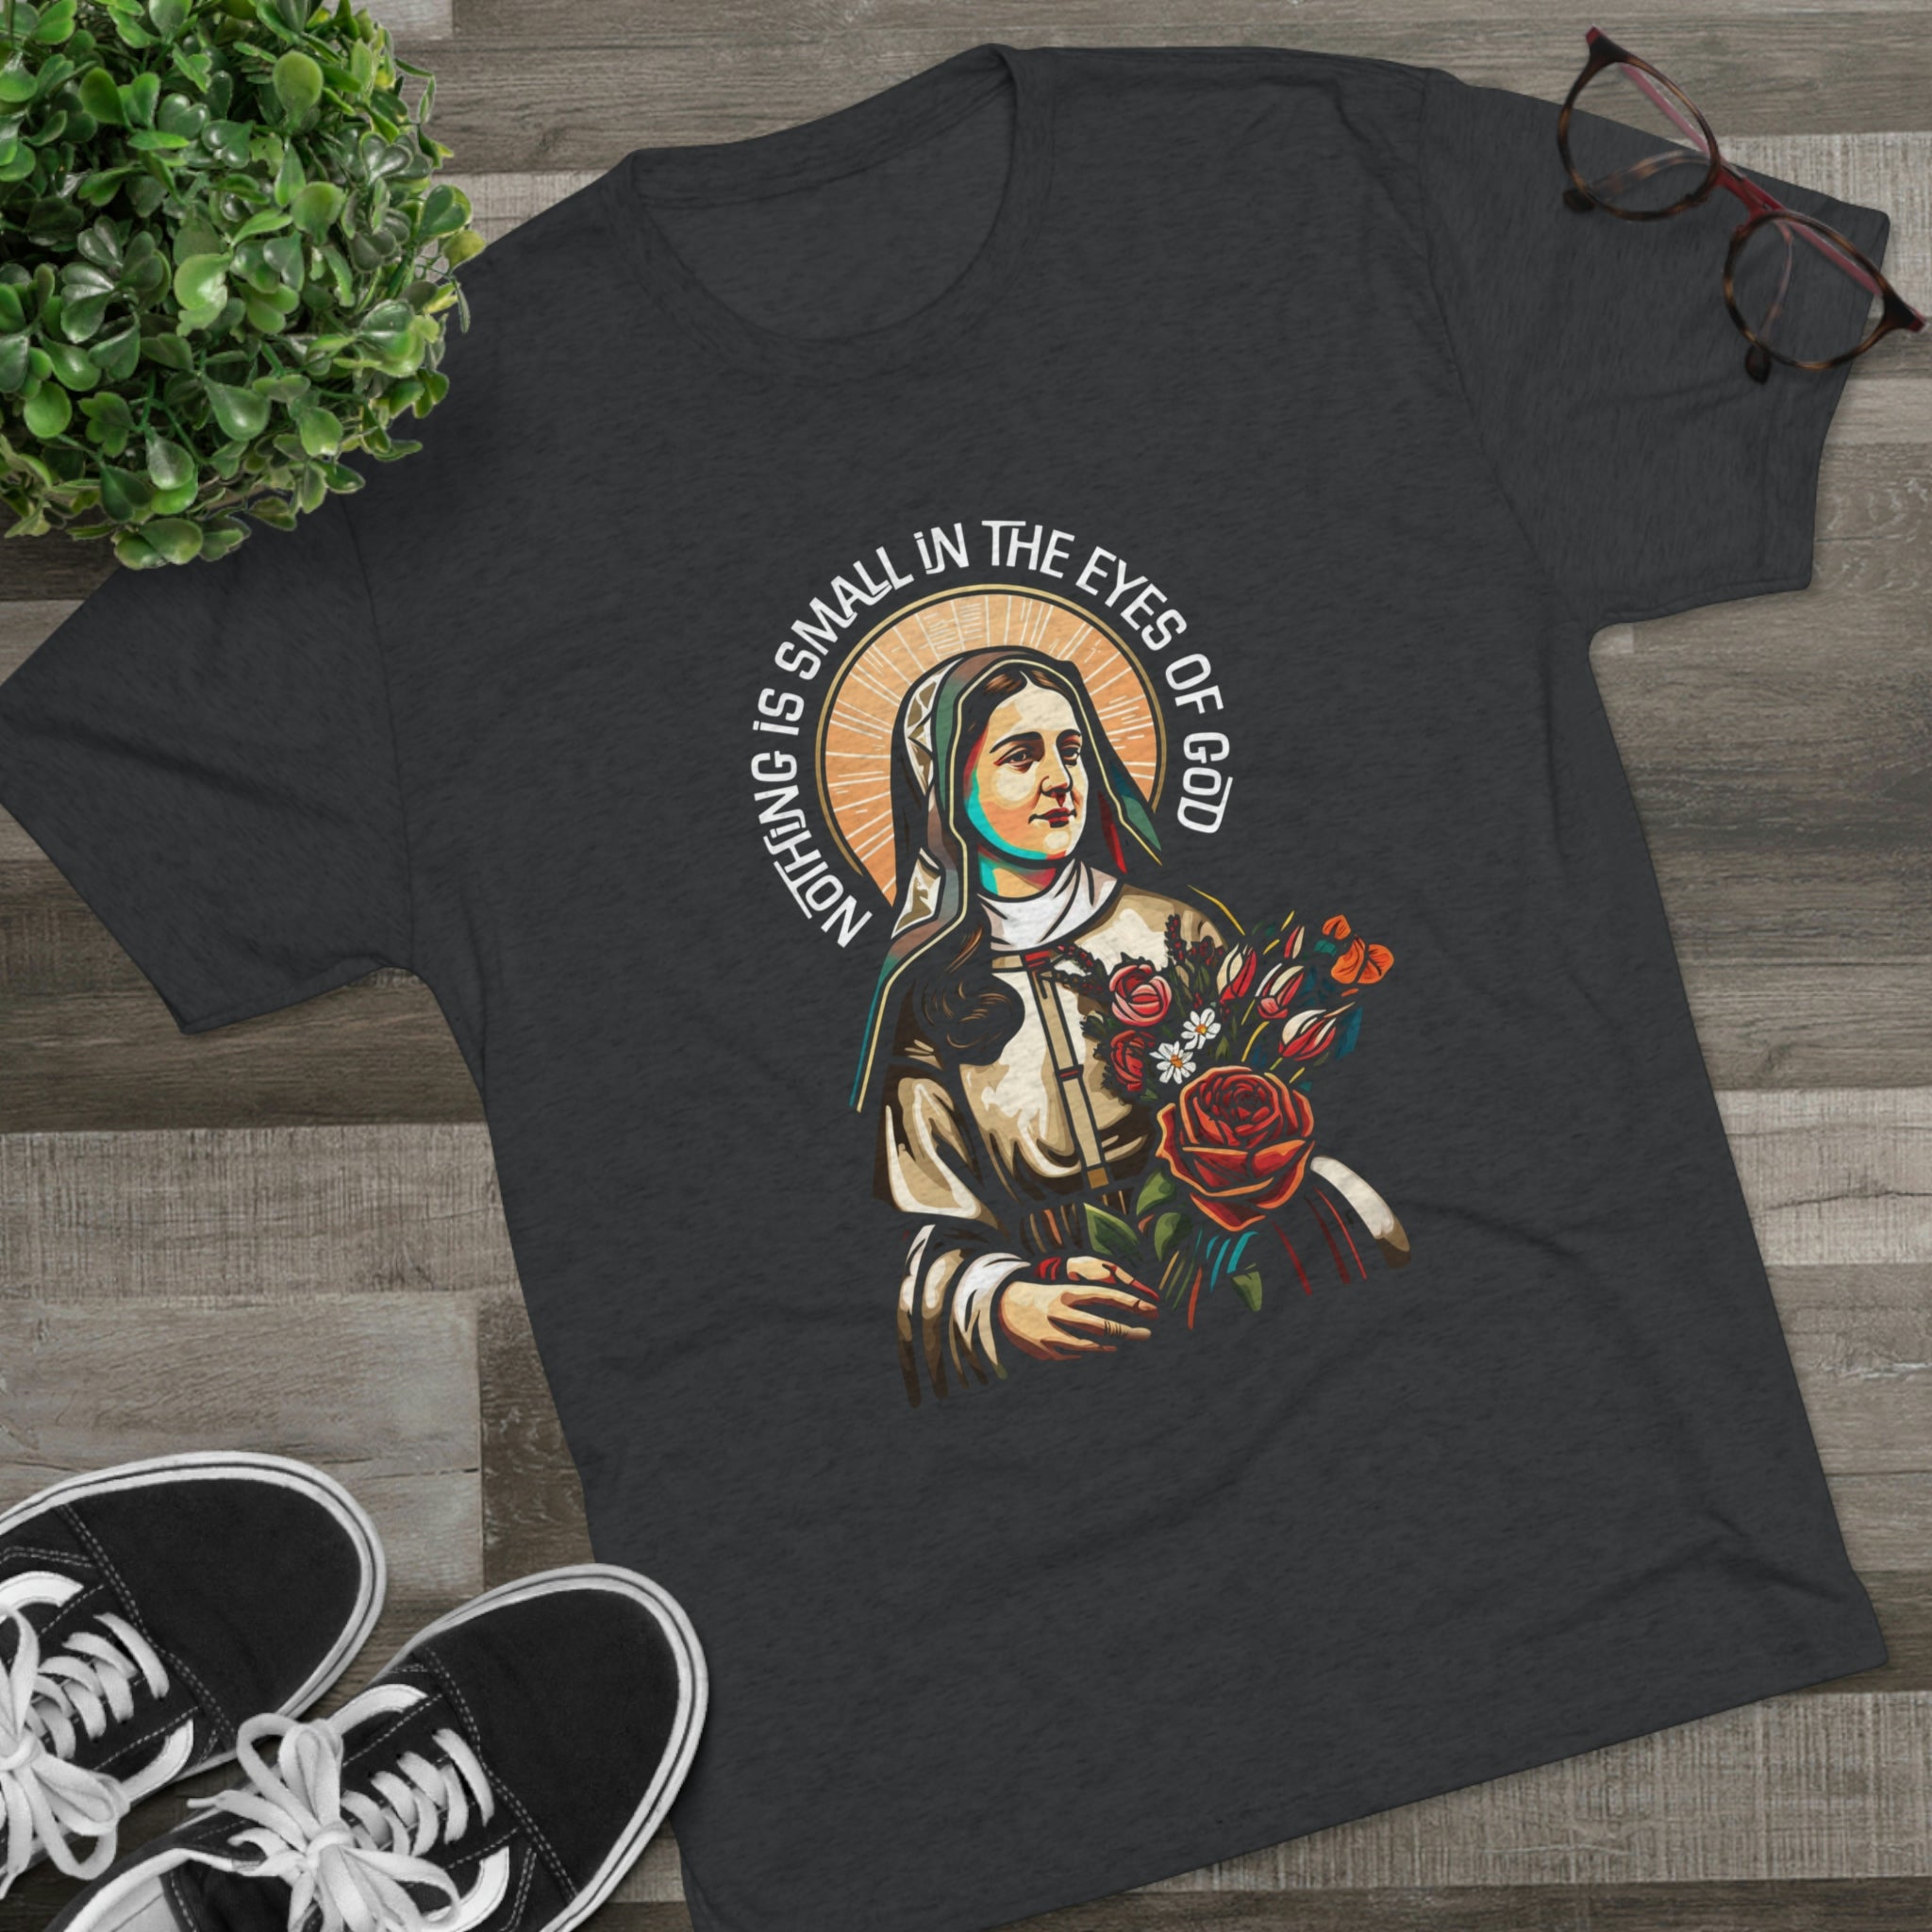 Men's Nothing Is Small Is The Eyes Of God Premium T-shirt